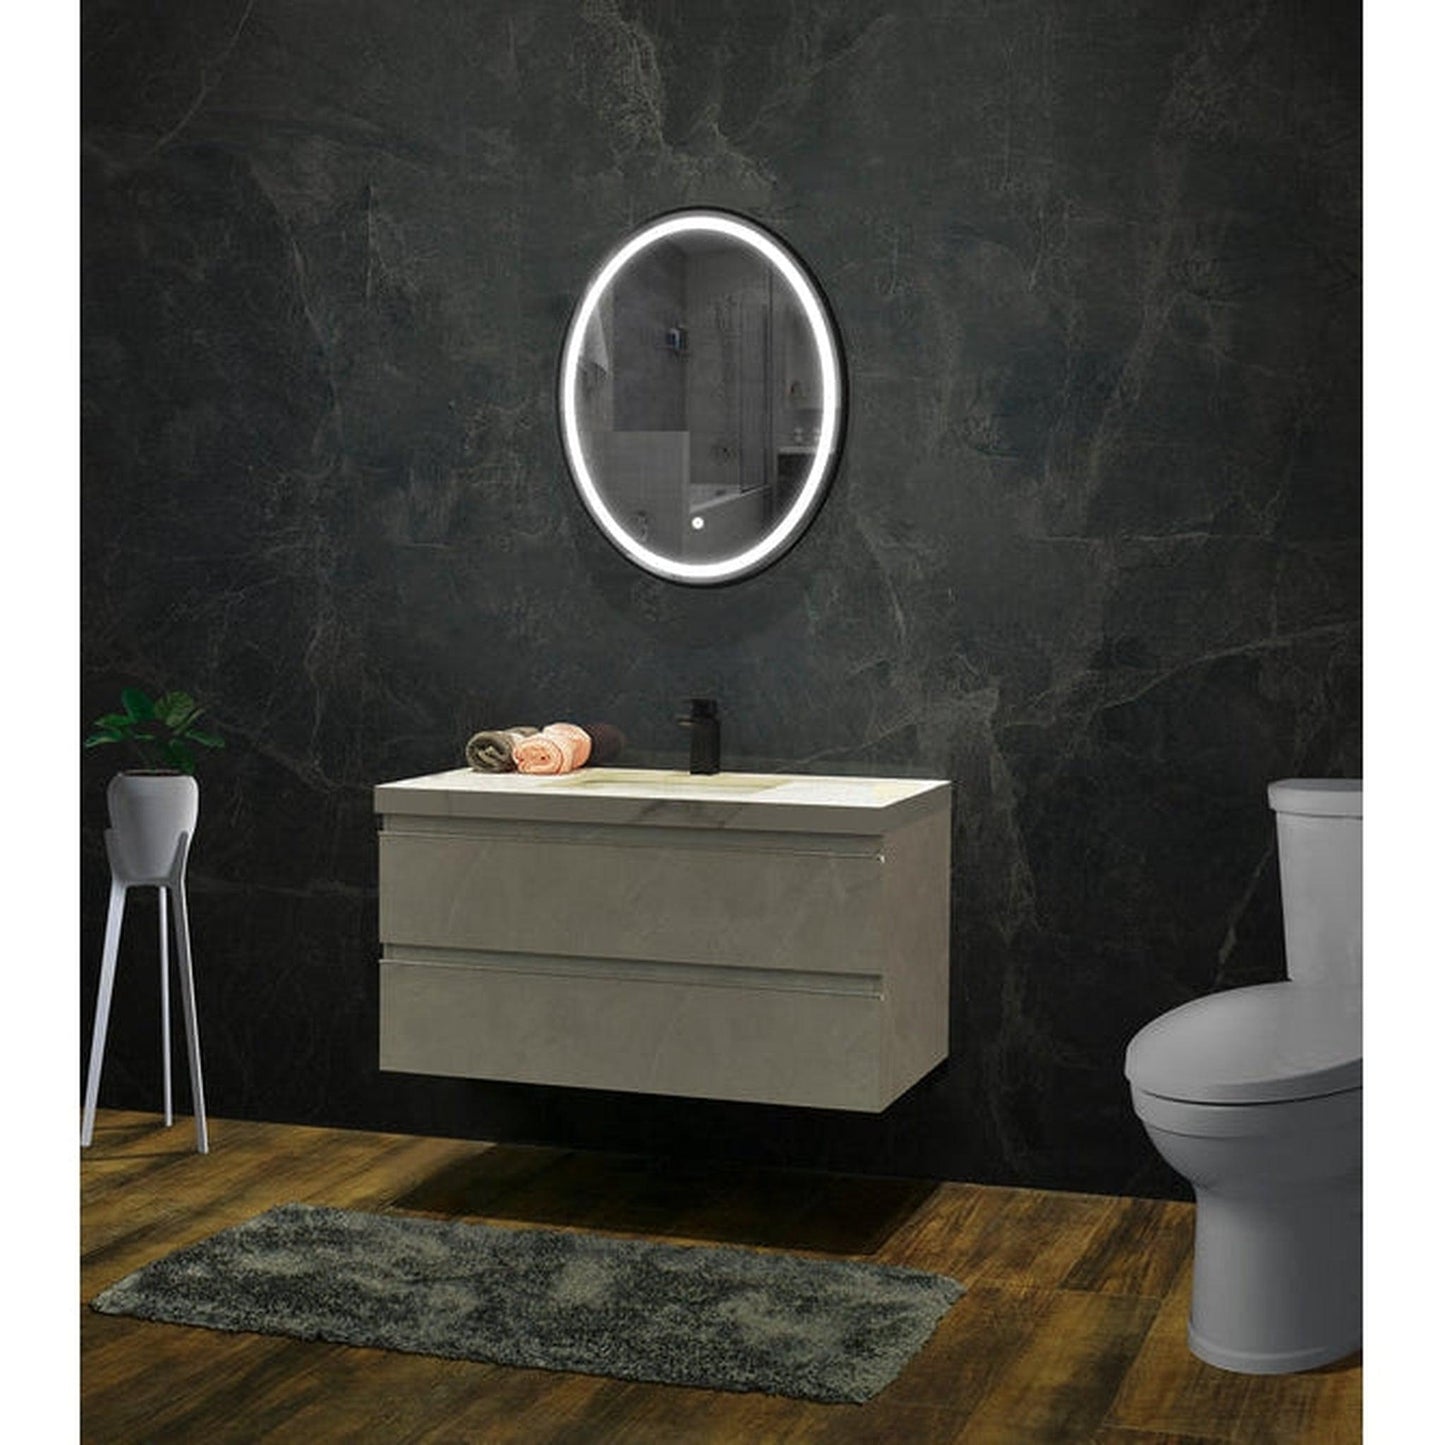 Vanity Art 24" W x 32" H Black Oval LED Lighted Bathroom Vanity Wall Mirror With Touch Sensor